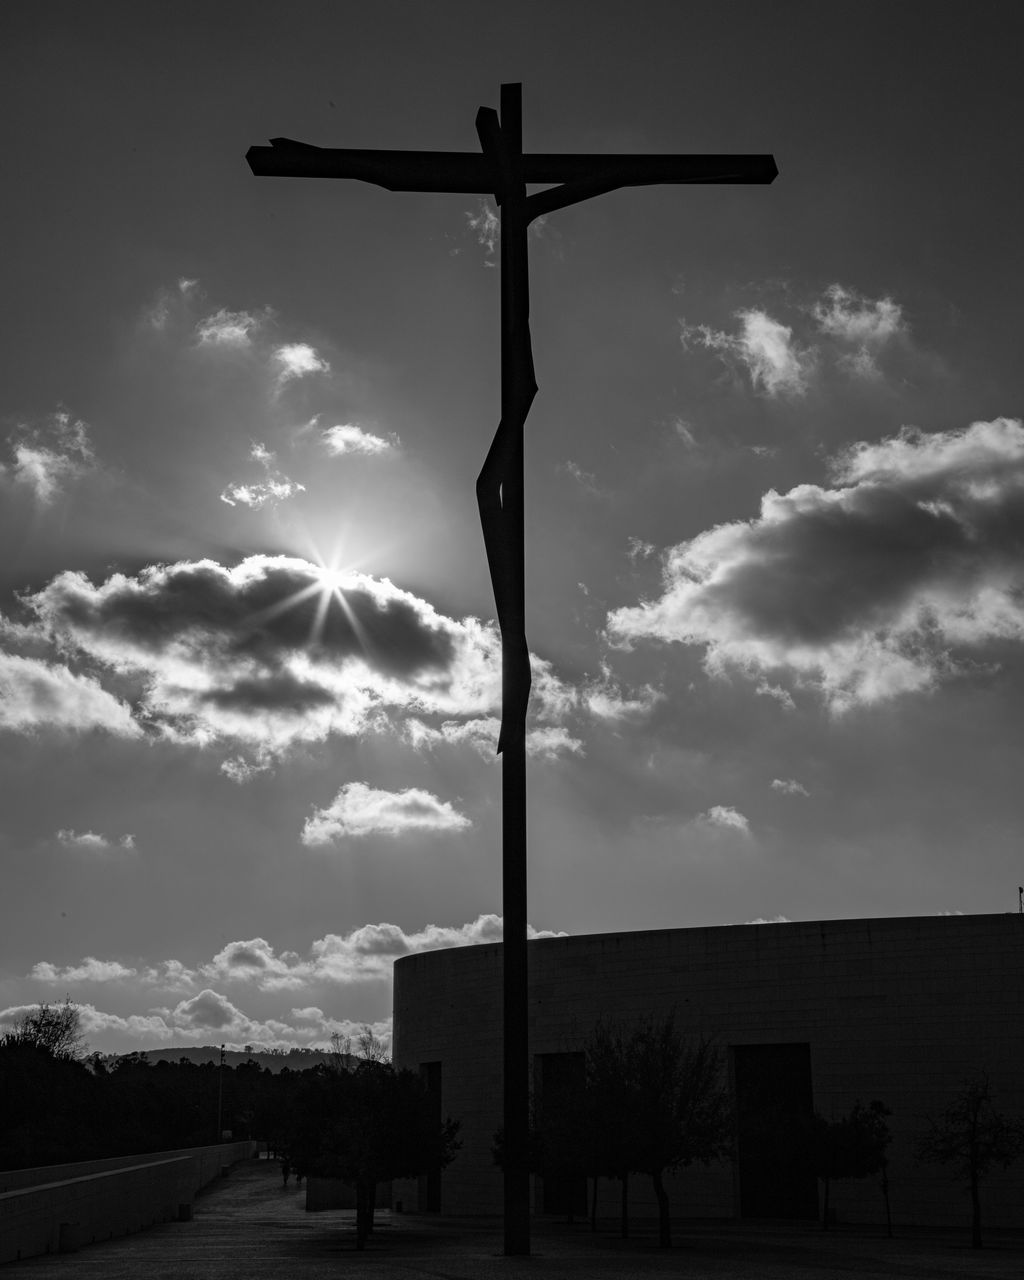 sky, cross, black and white, cloud, religion, belief, spirituality, symbol, monochrome, darkness, nature, crucifix, monochrome photography, silhouette, architecture, catholicism, no people, place of worship, cross shape, street light, cloudscape, environment, storm, outdoors, built structure, dramatic sky, low angle view, black, tranquility, beauty in nature